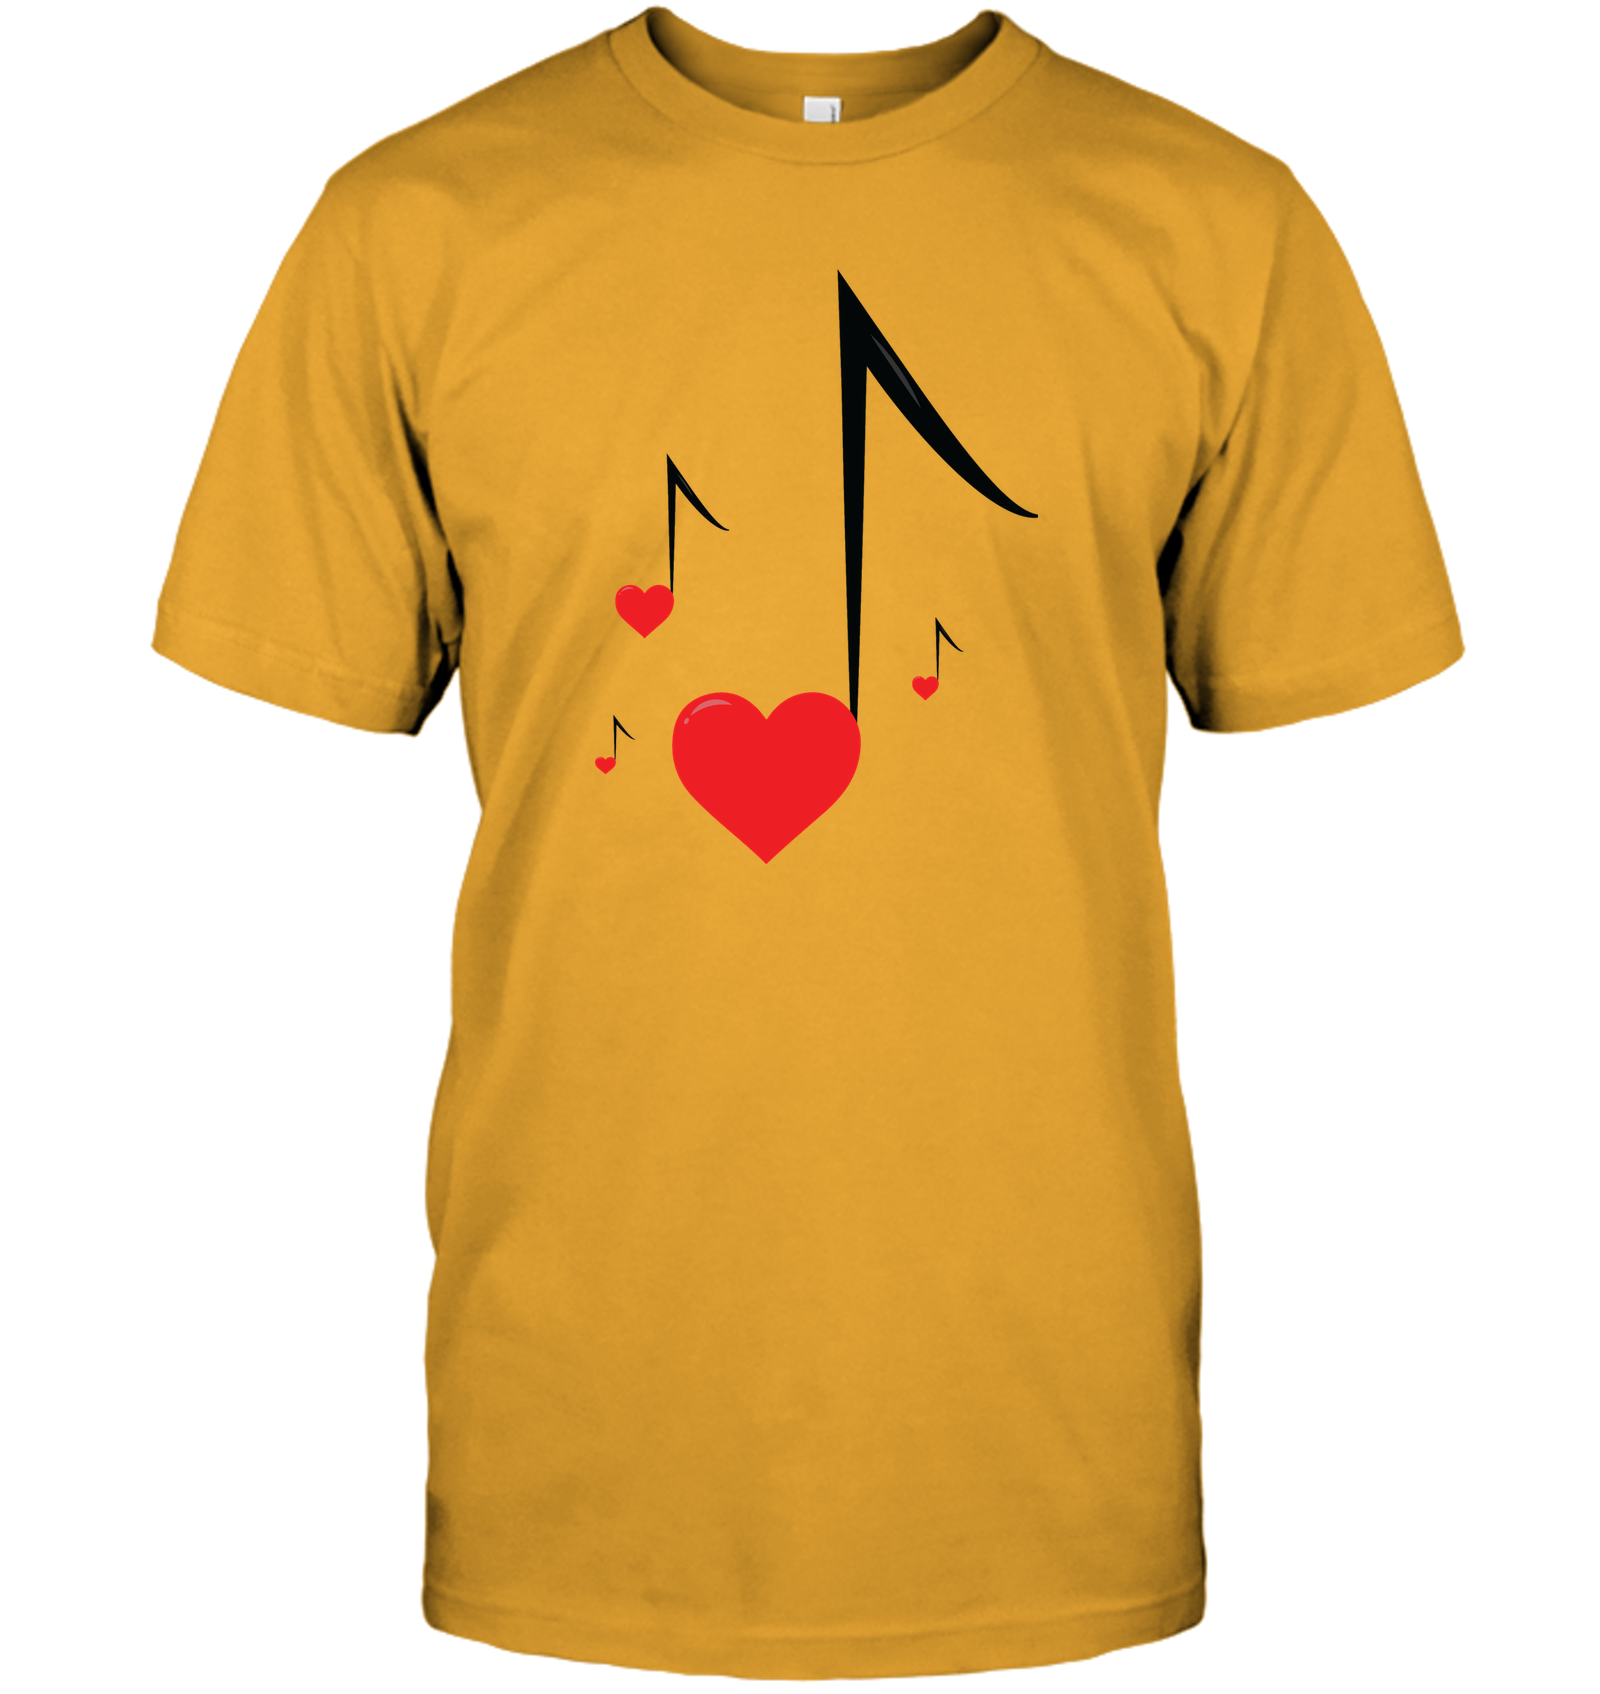 Four Floating Heart Notes - Hanes Adult Tagless® T-Shirt